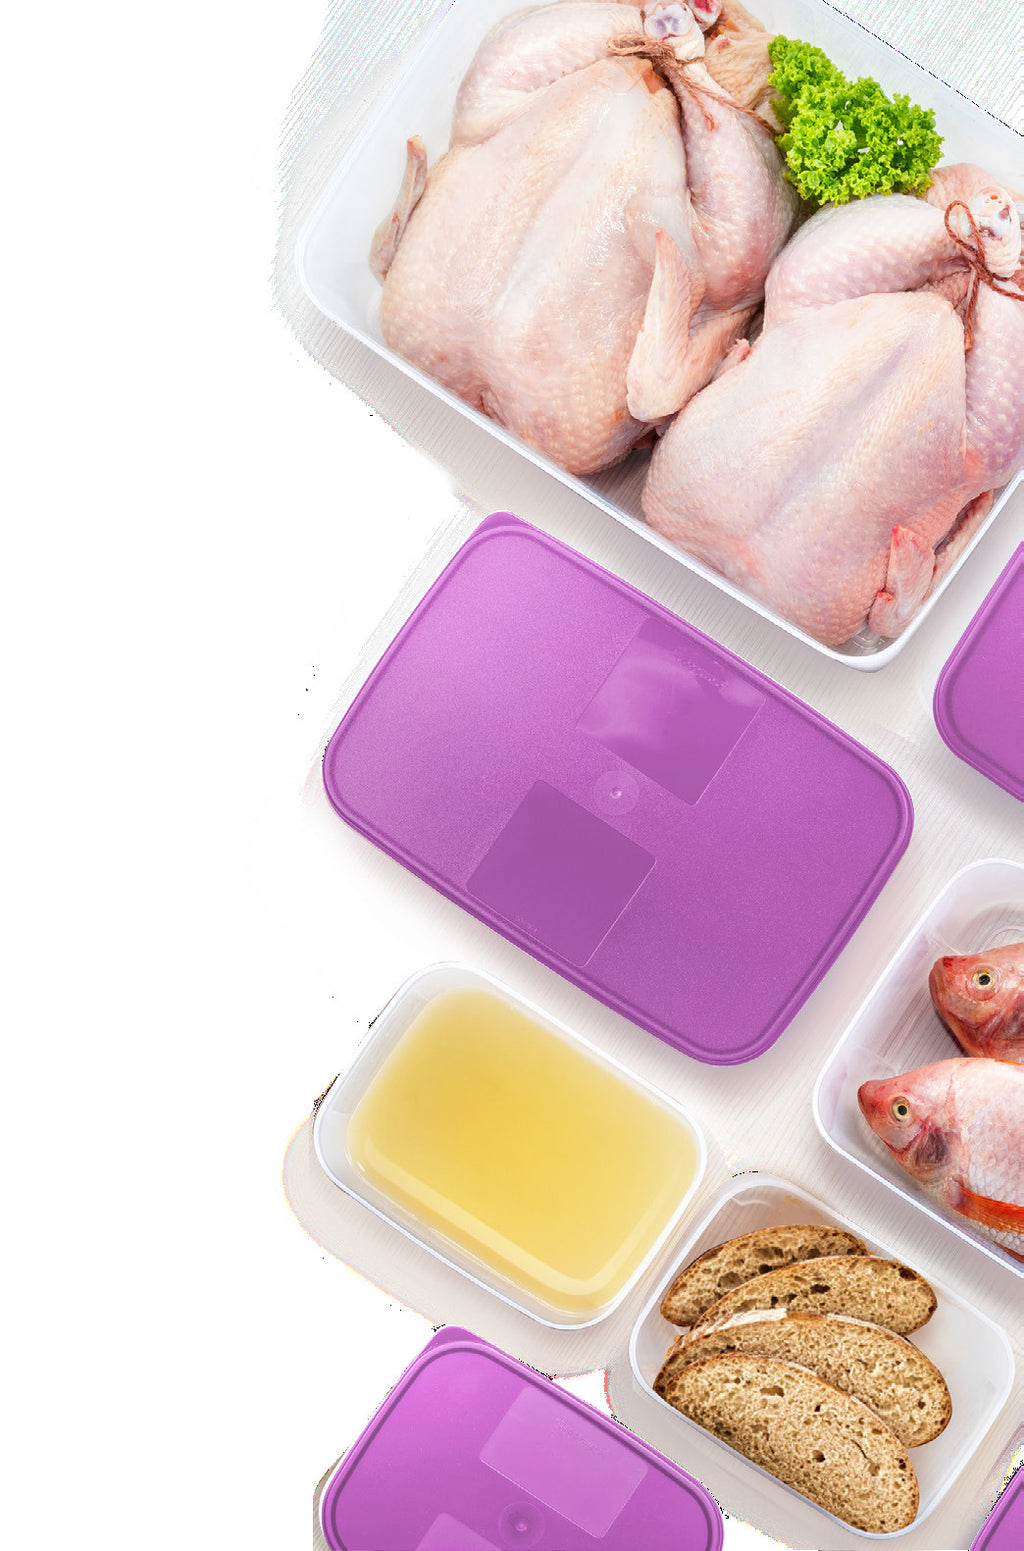 Tips for Packing Leak-Proof Lunches with Tupperware Containers – eTuppStore  (PM) by Tupperware Brands Malaysia Sdn. Bhd. 199401001646 (287324-M)